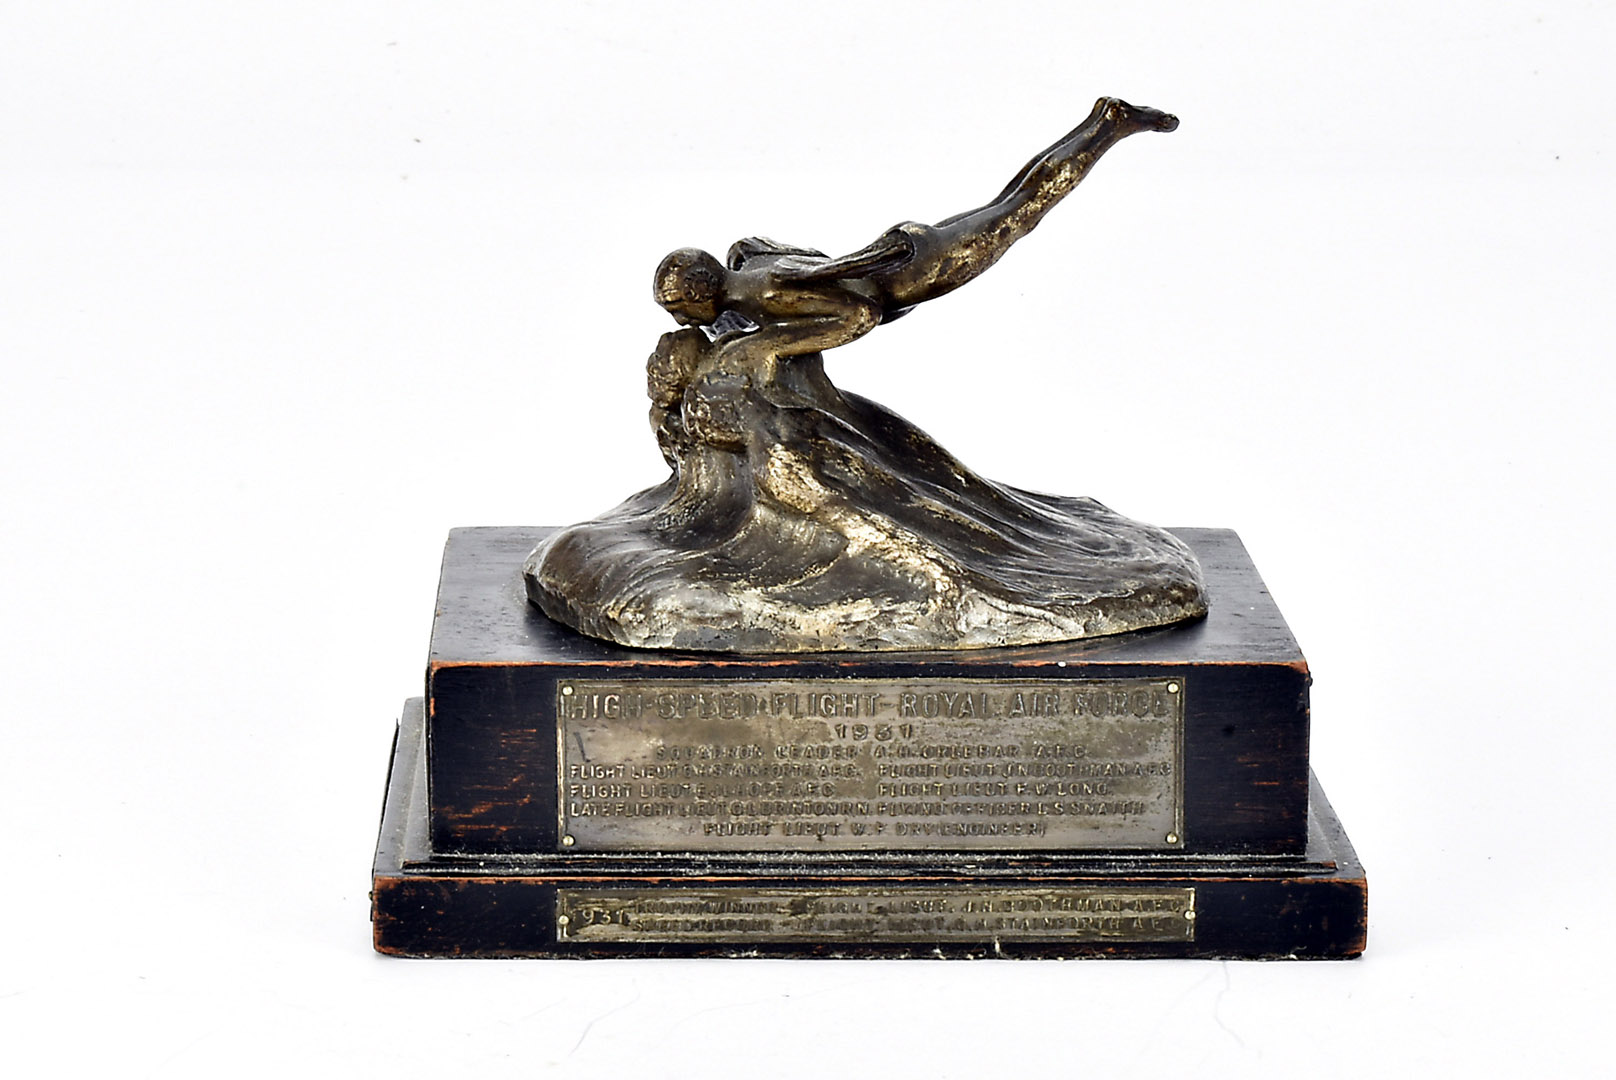 Aviation, Rare 1930s Schneider Trophy miniature, surmounted with a sculpture of silver plated bronze depicting a Zephyr skimming the waves and a nude winged figure kissing Zephyr